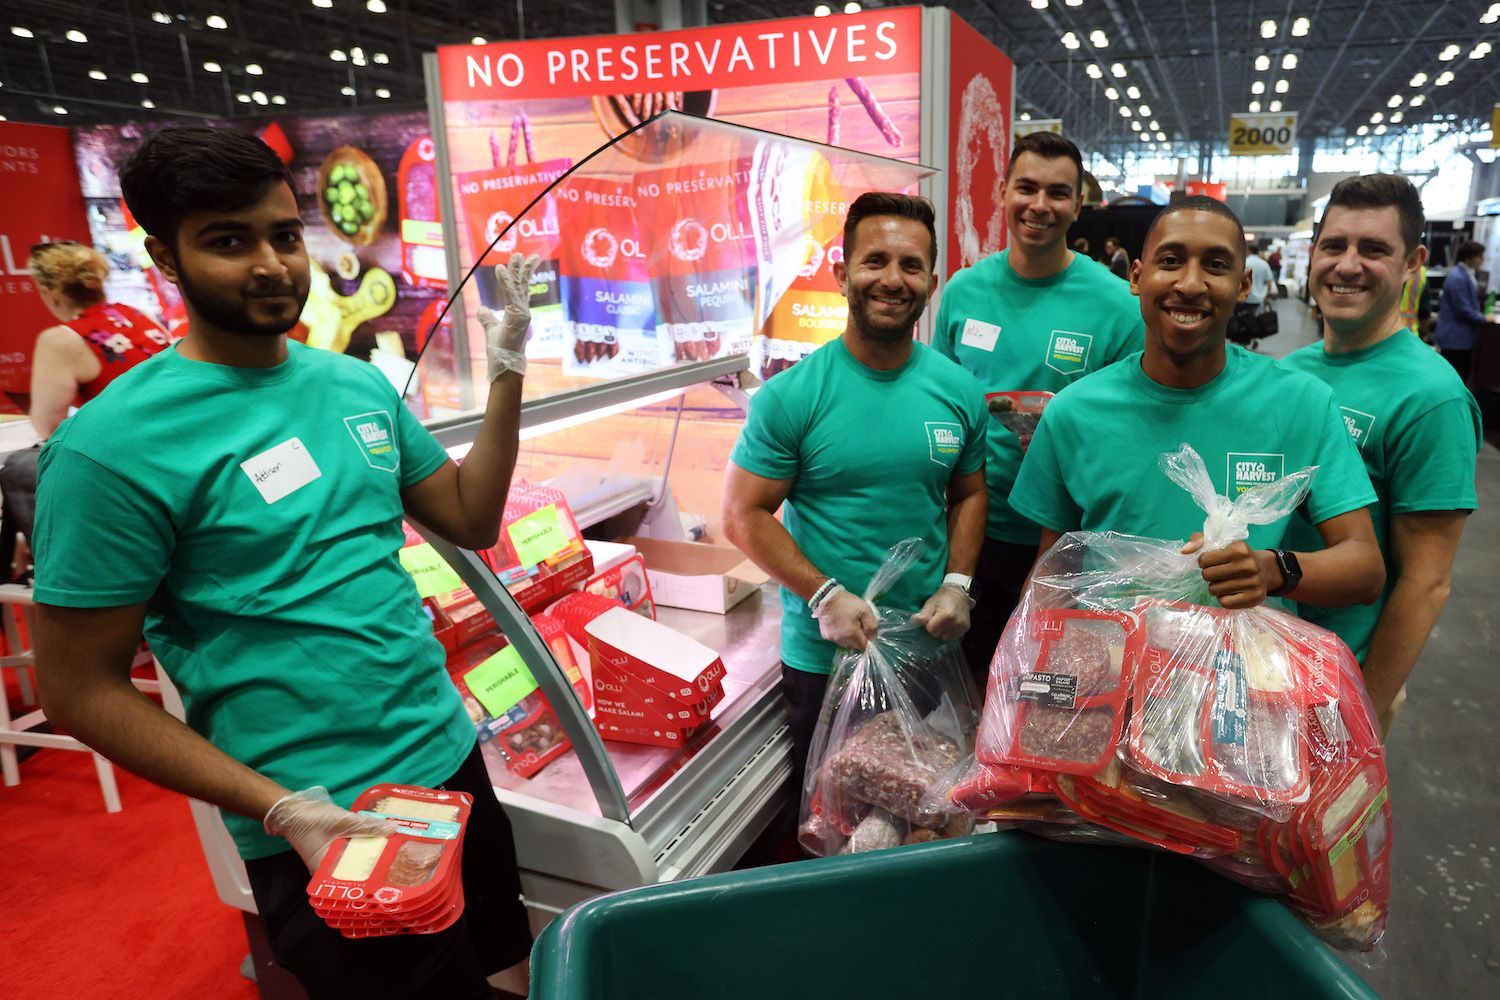 City Harvest Volunteers collecting up unused food after the Fancy Food Show - A group of smiling men with a cart and bags